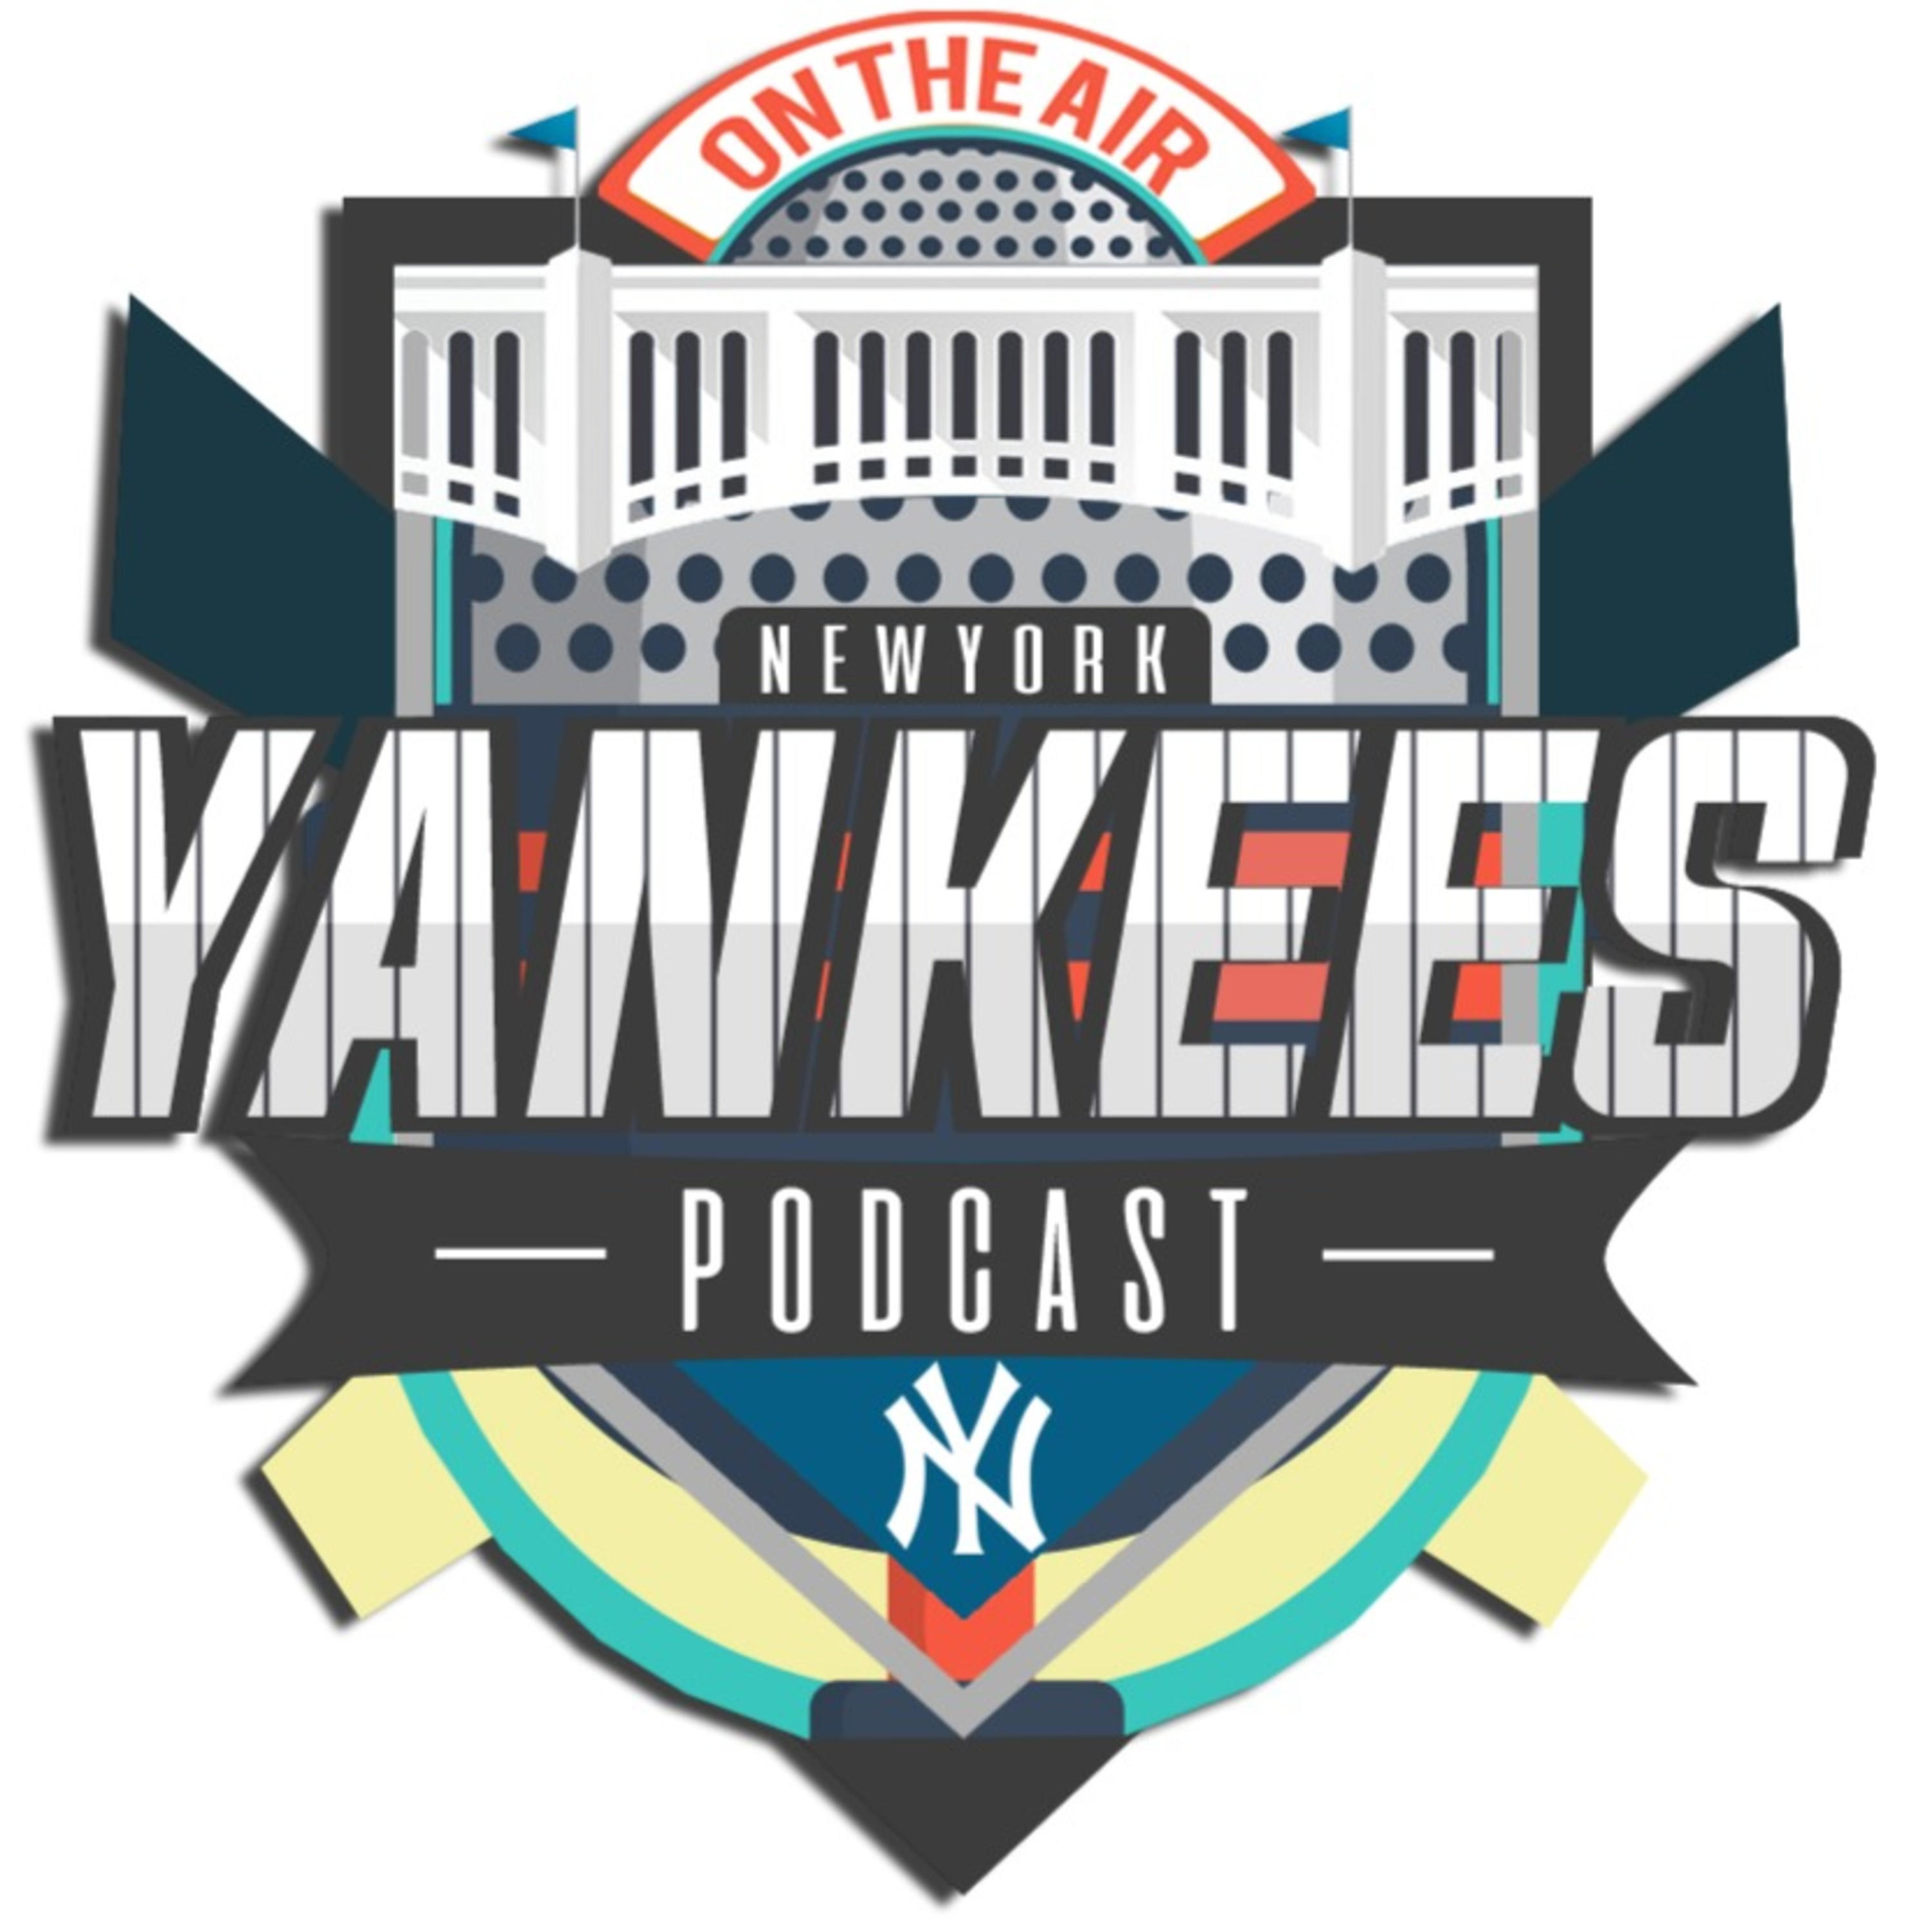 New York Yankees Hungary Podcast - Bé x DS! x Mike - S02EP14